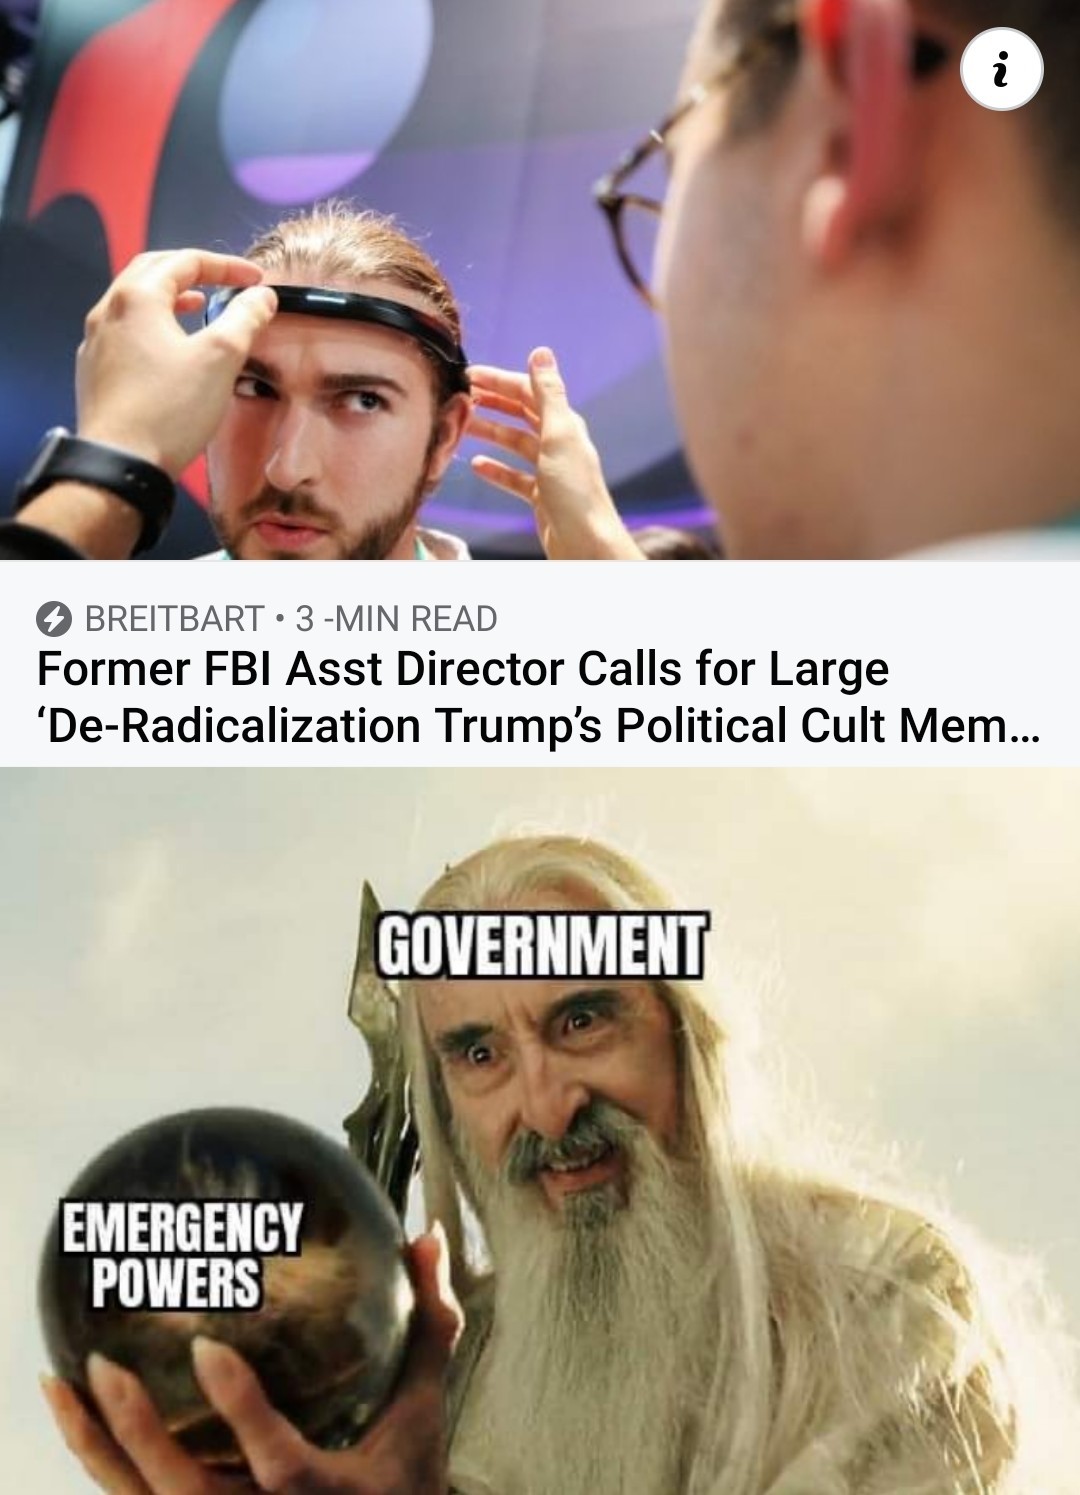 "Re-education" camps coming soon - meme